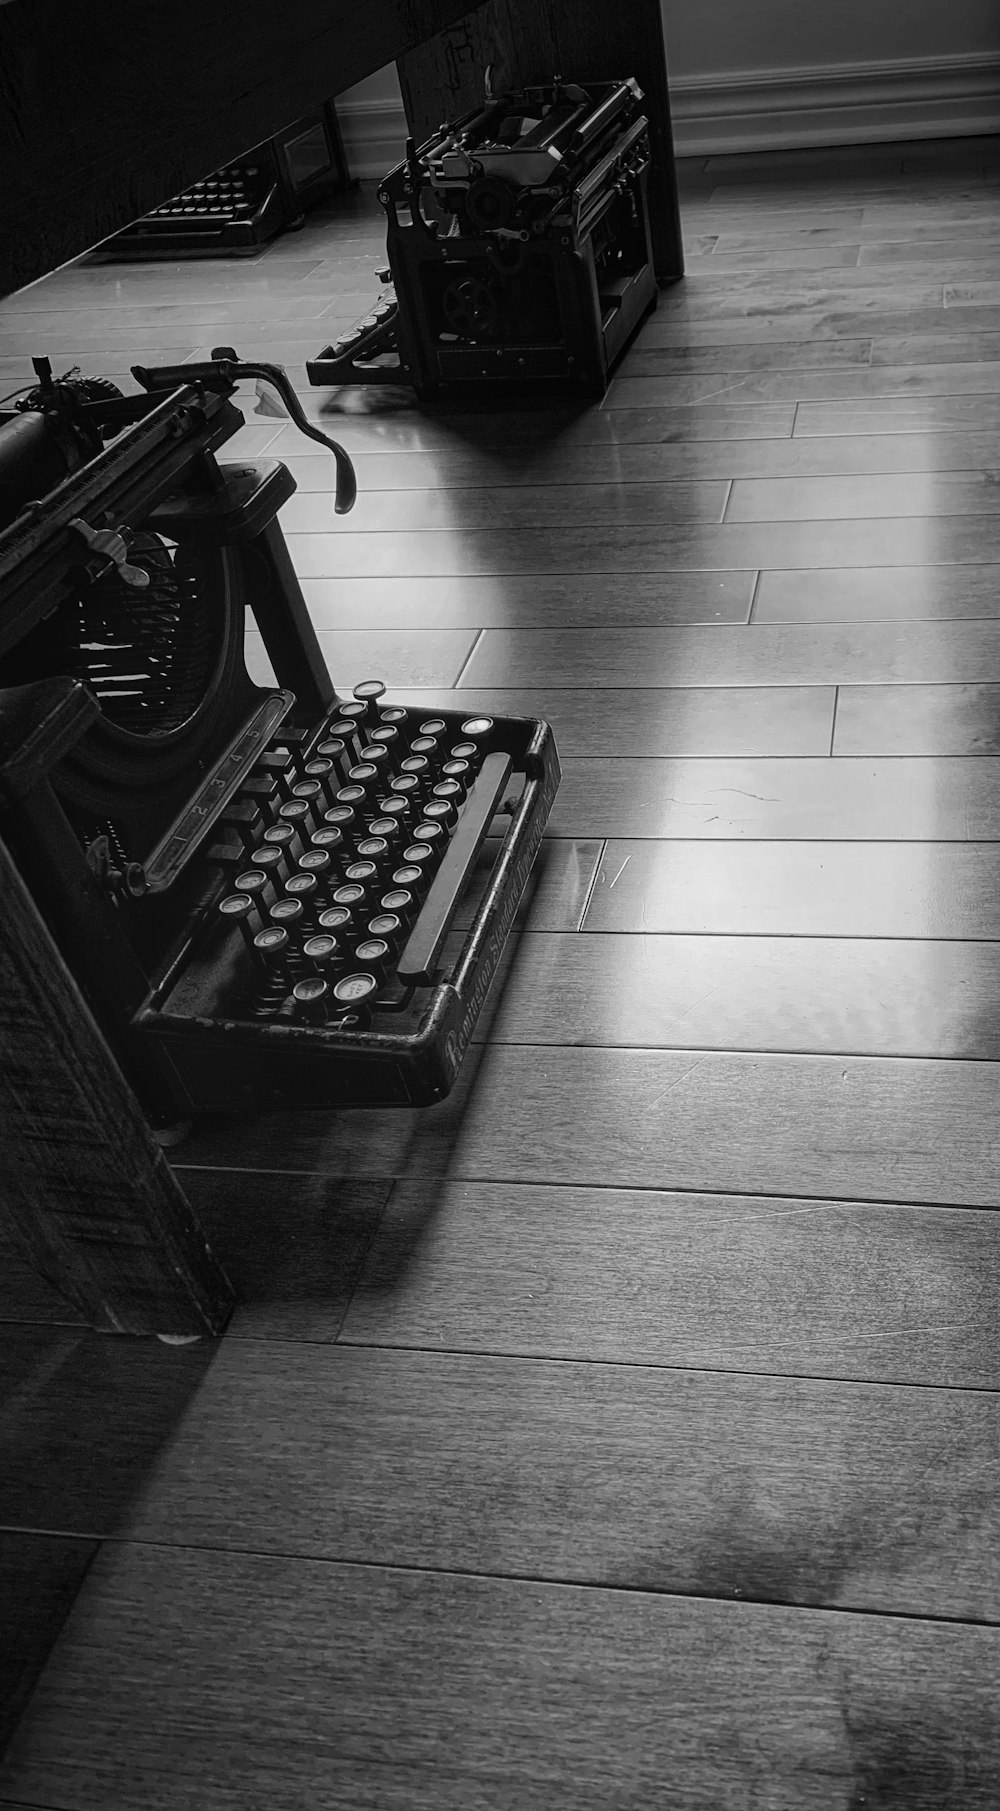 a black and white photo of an old fashioned typewriter